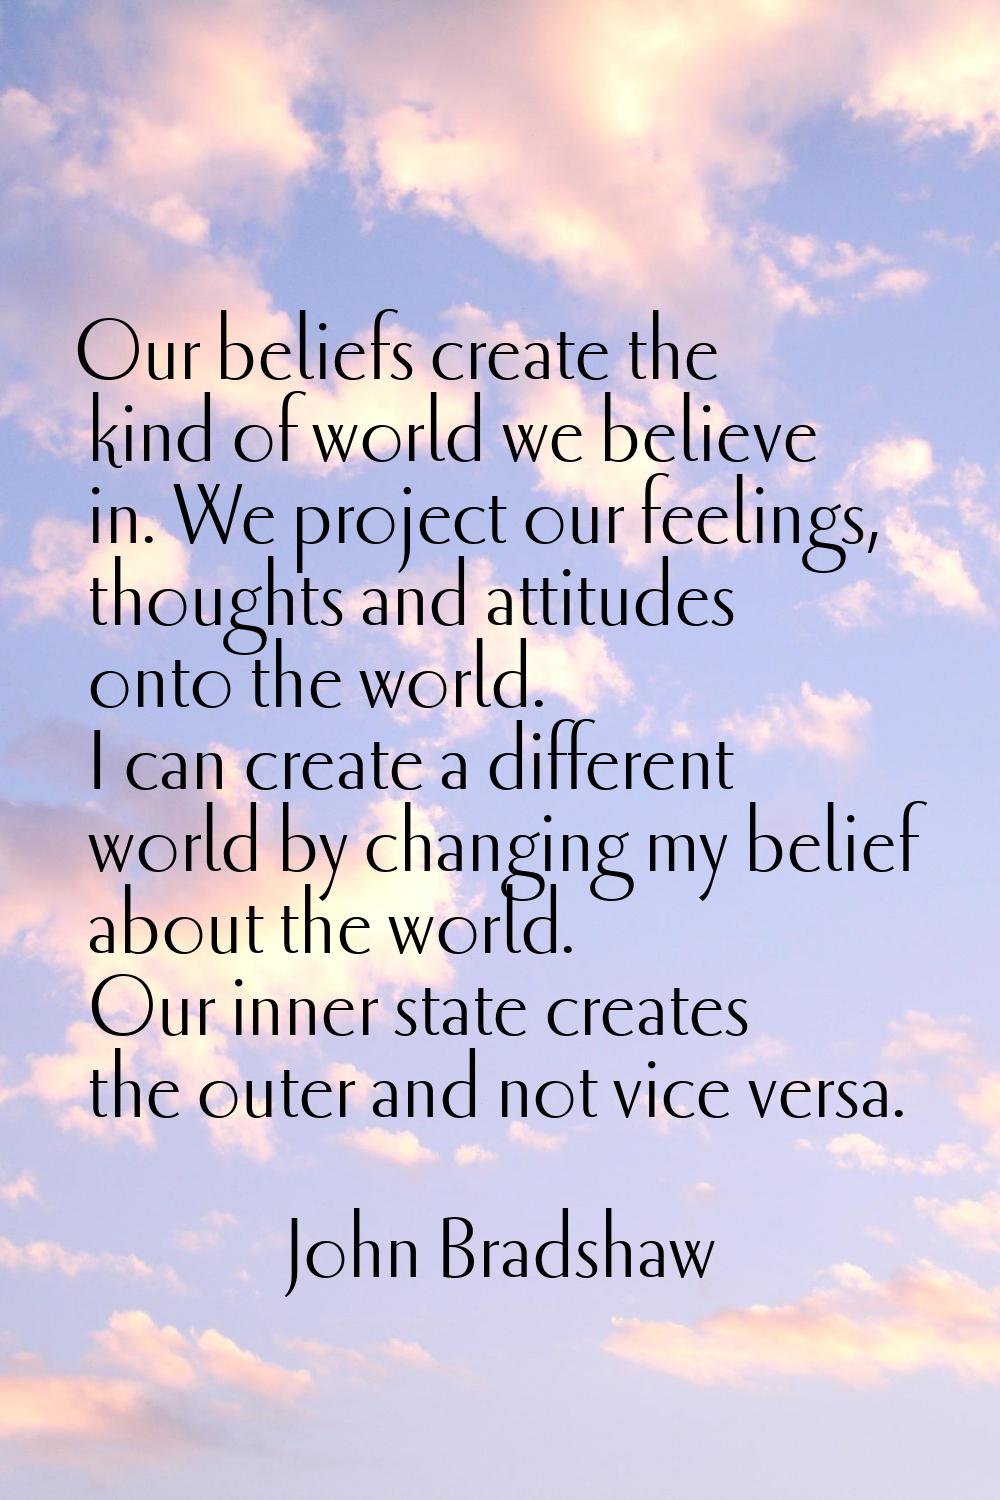 Our beliefs create the kind of world we believe in. We project our feelings, thoughts and attitudes